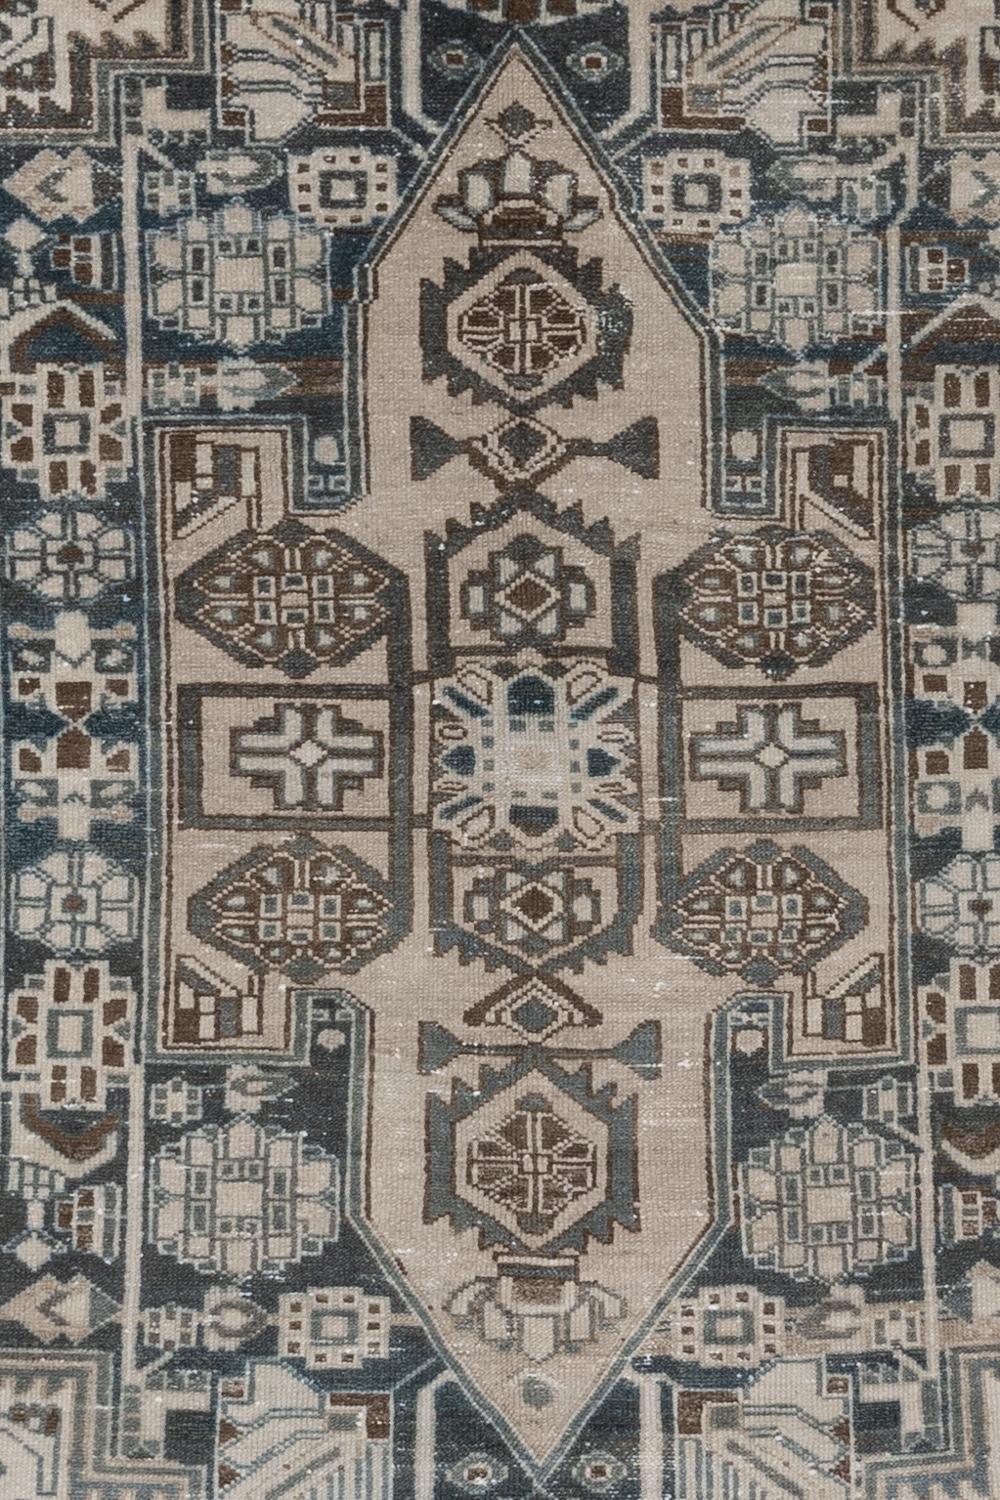 Age: Circa 1940

Colors: blue, emerald, ivory, brown

Pile: medium 

Wear Notes: 4

Material: wool on cotton

Vintage rugs are made by hand over the course of months, sometimes years. Their imperfections and wear are evidence of the hard